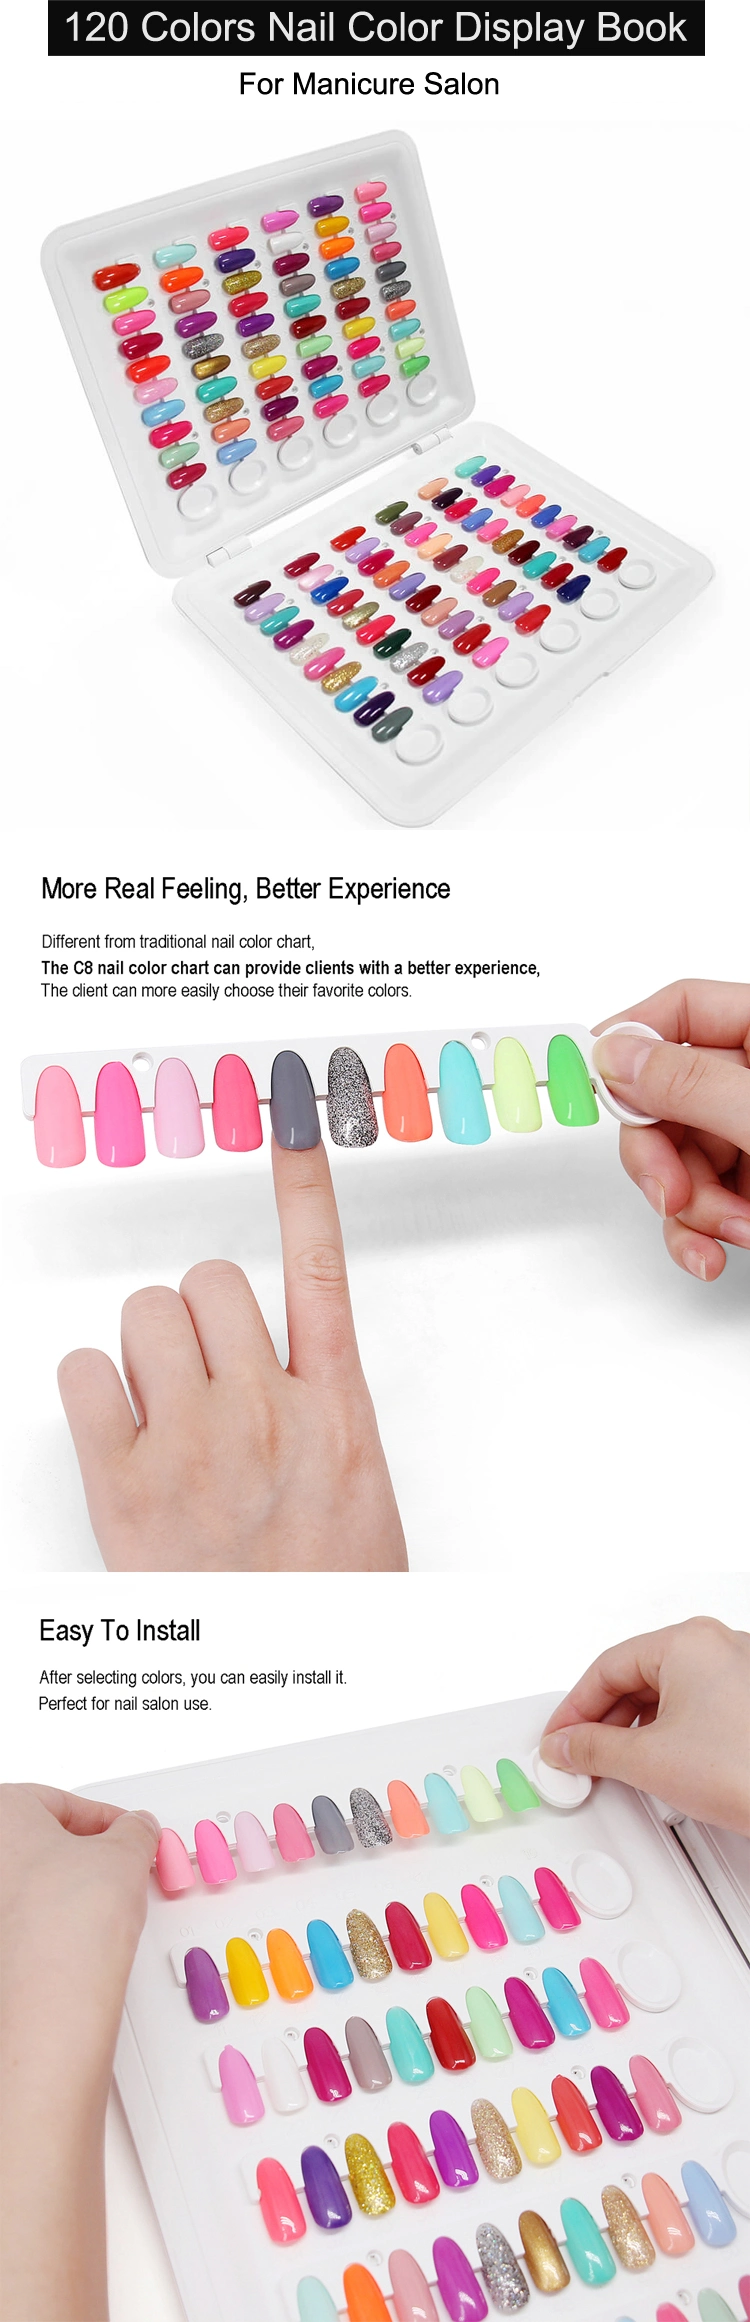 Professional 120 Nail Gel Polish Colors Display Book, Portable Nail Color Card for Manicure Salon